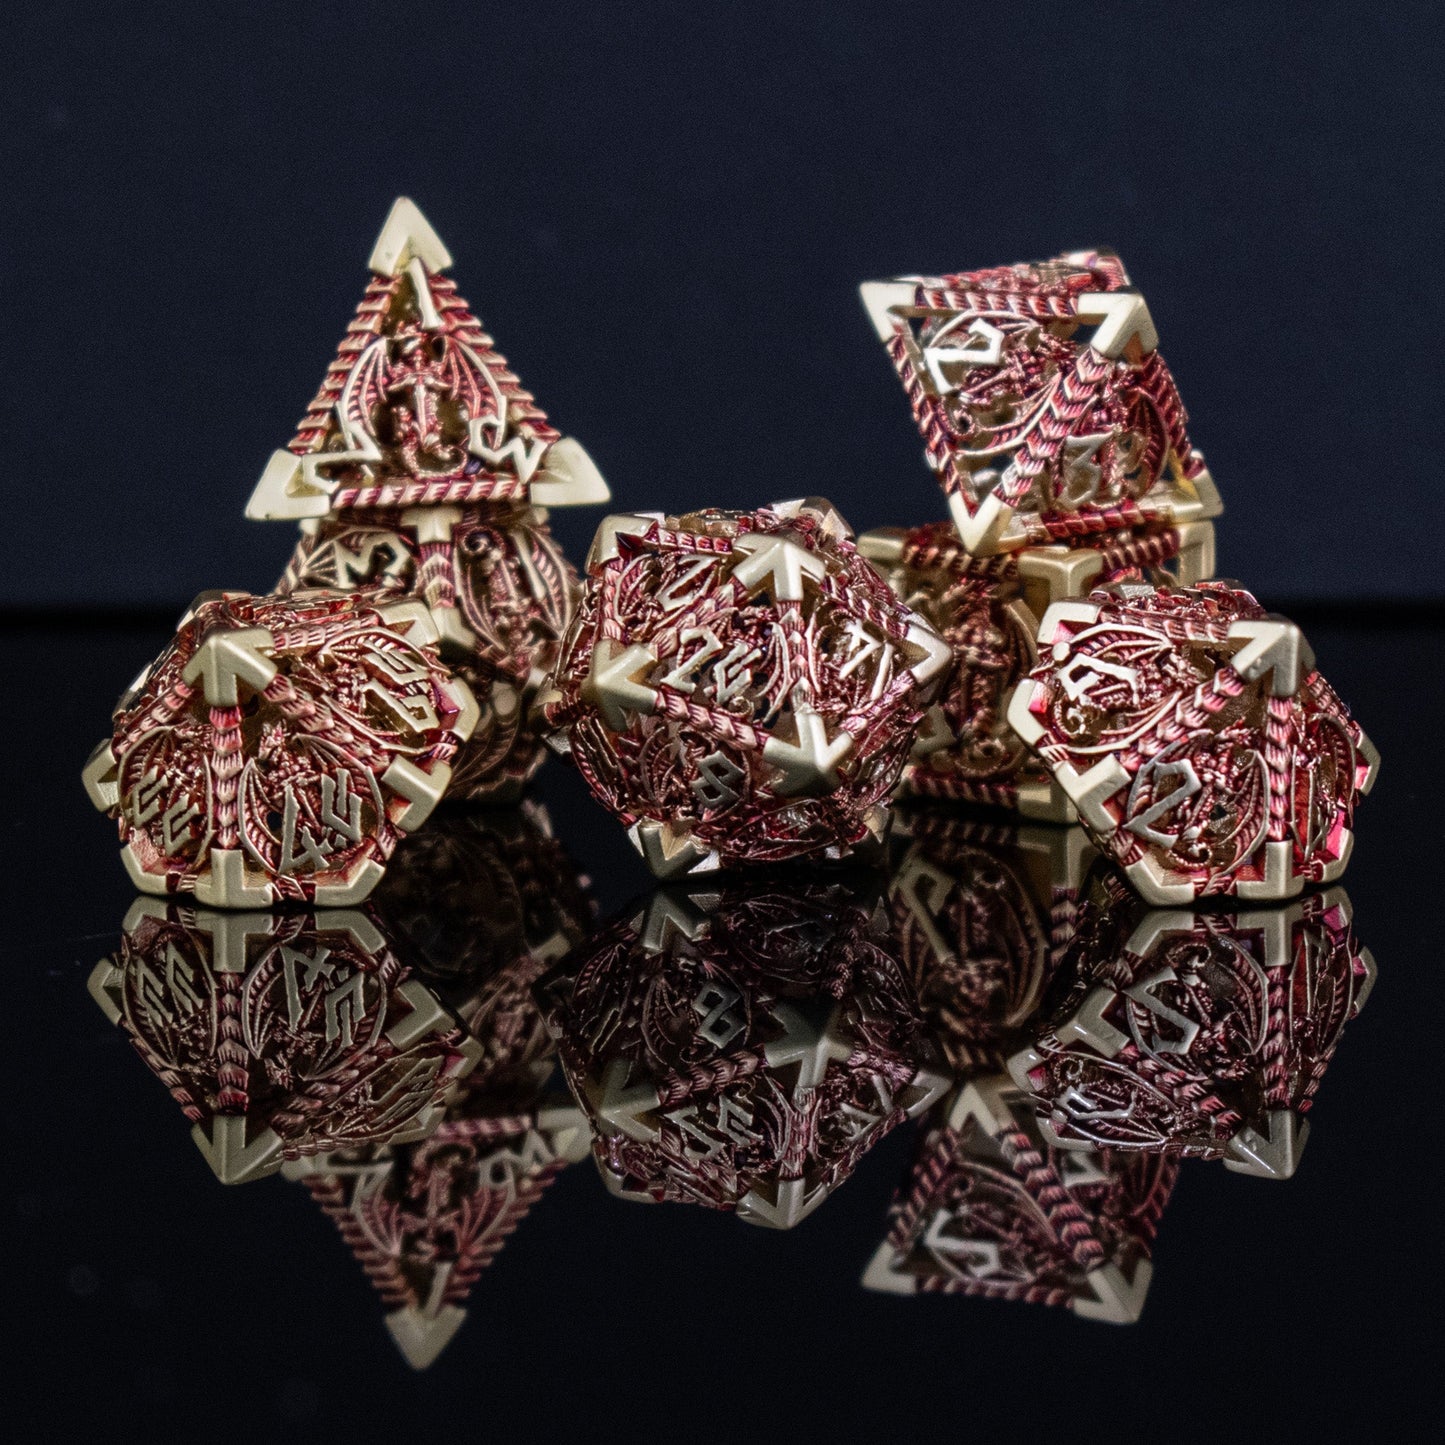 Dragon Sword Hollow Metal Dice Set - Red and Gold